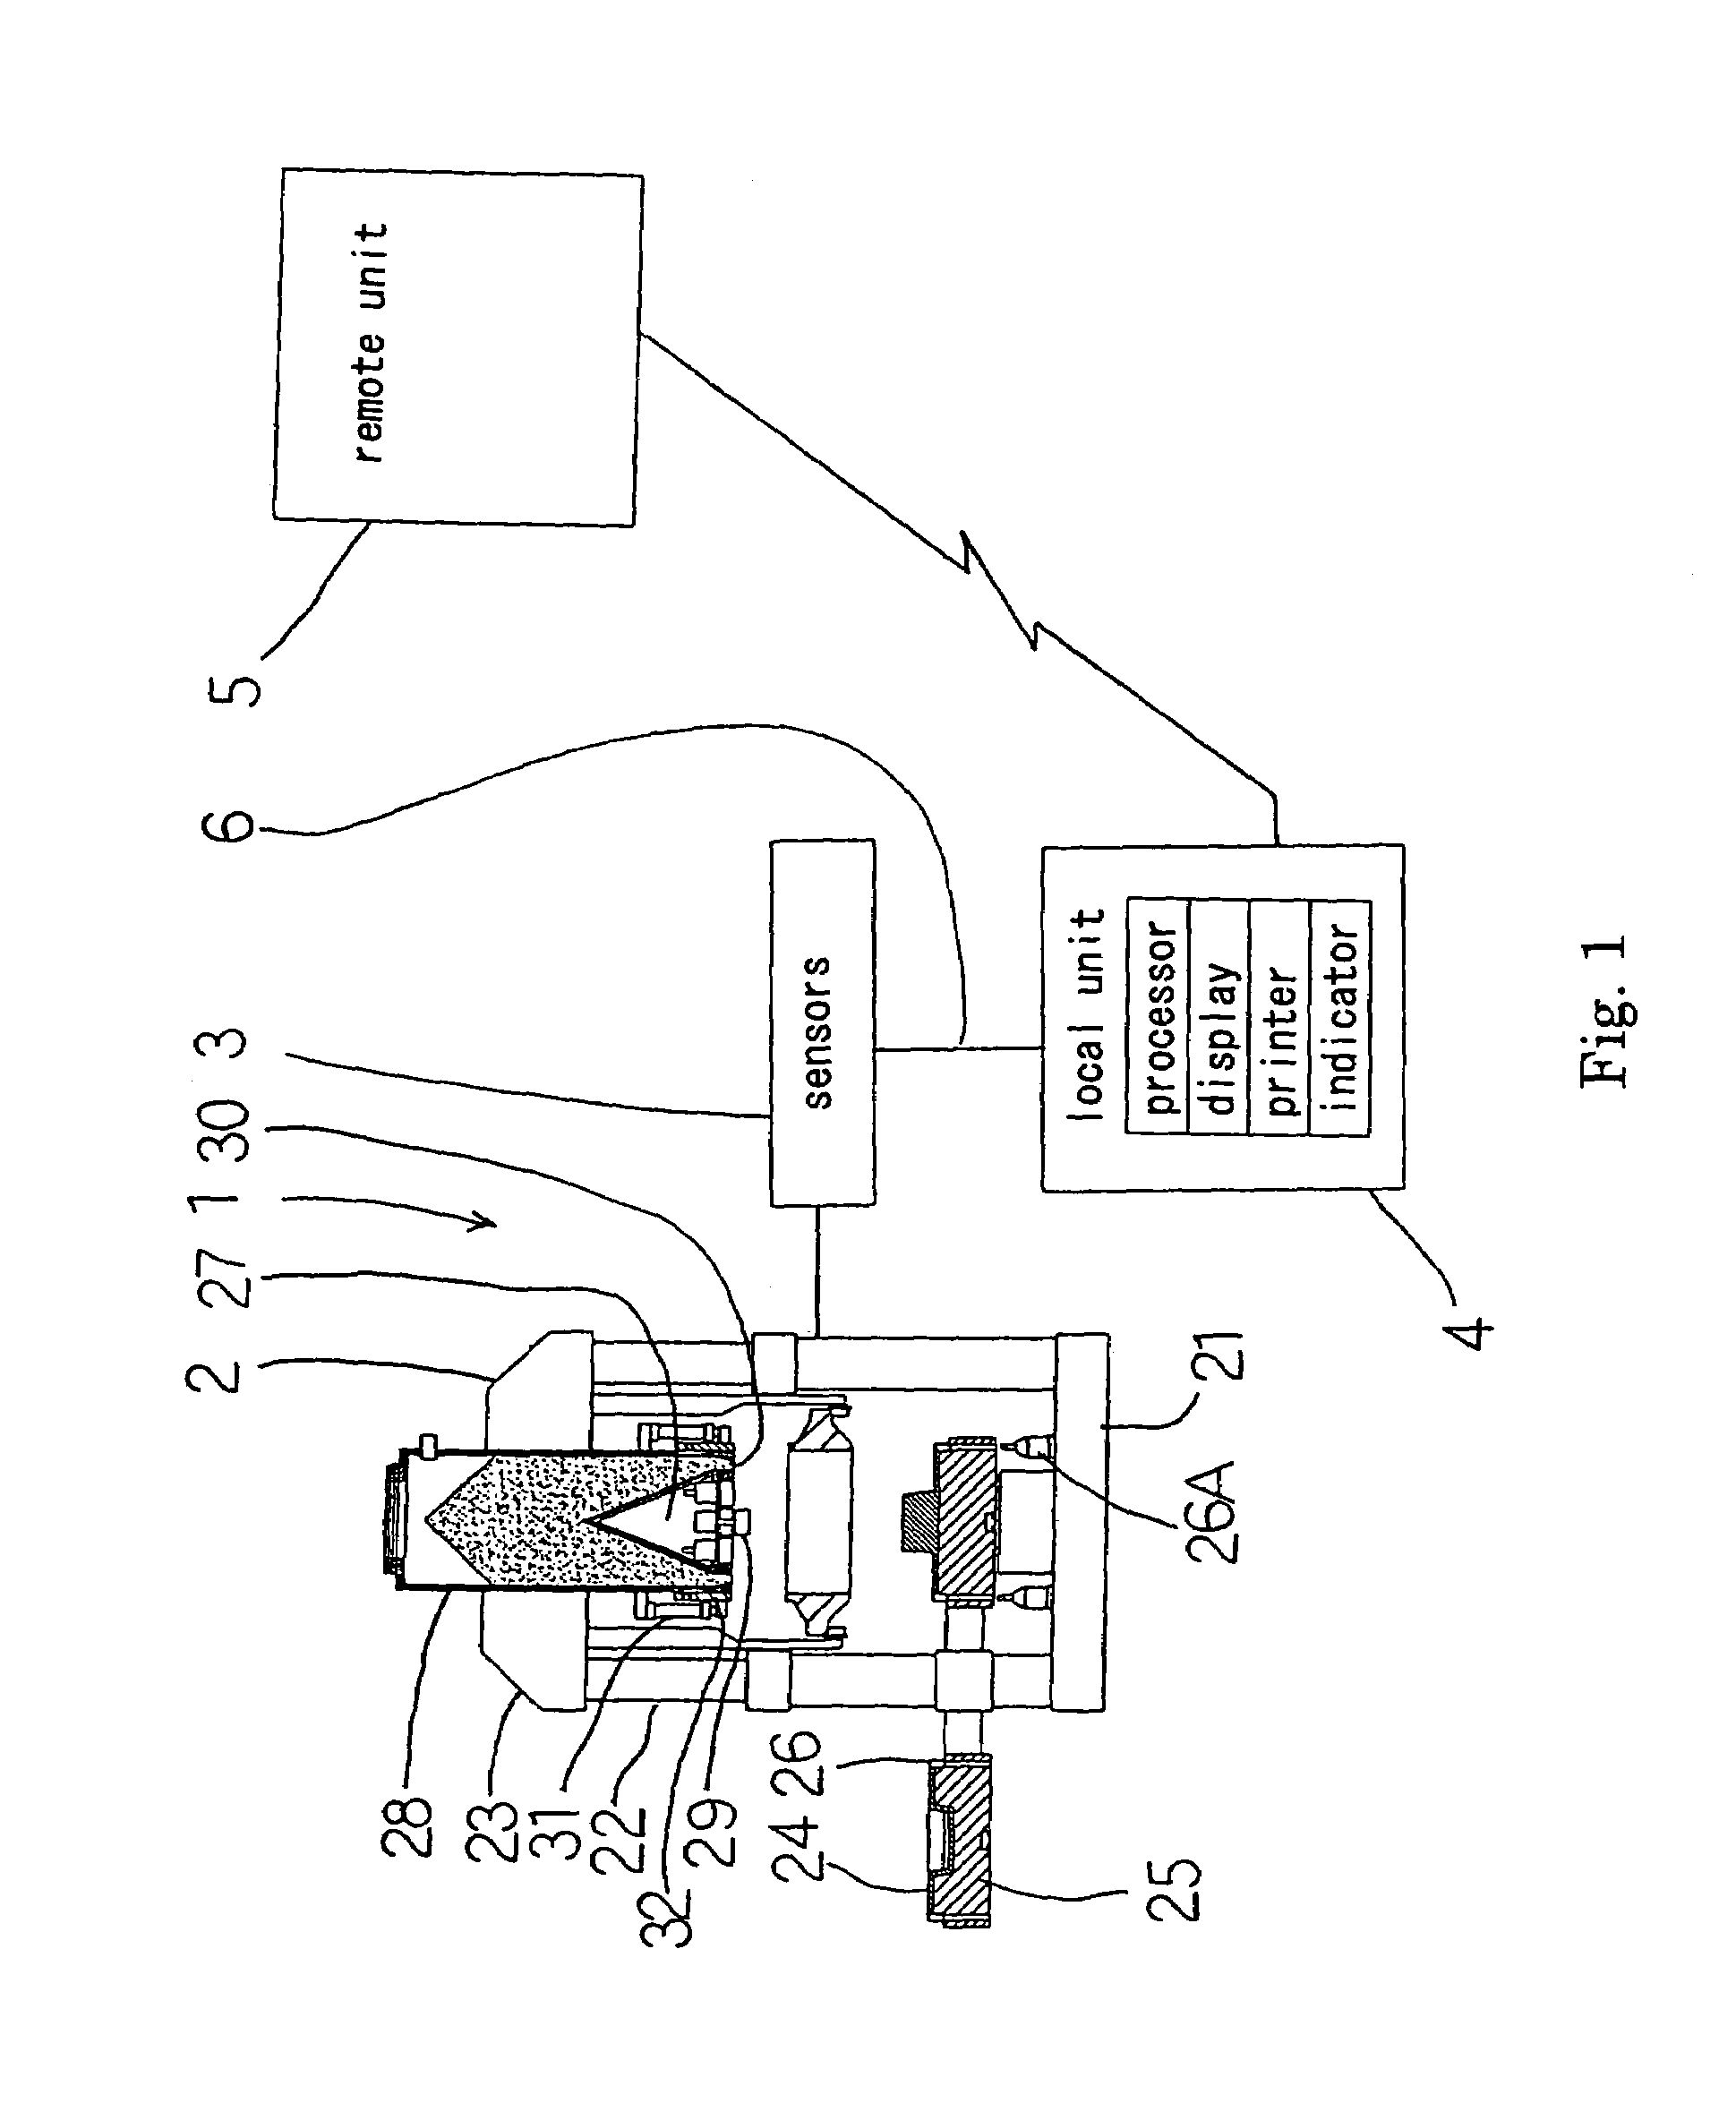 Method and system for monitoring a molding machine